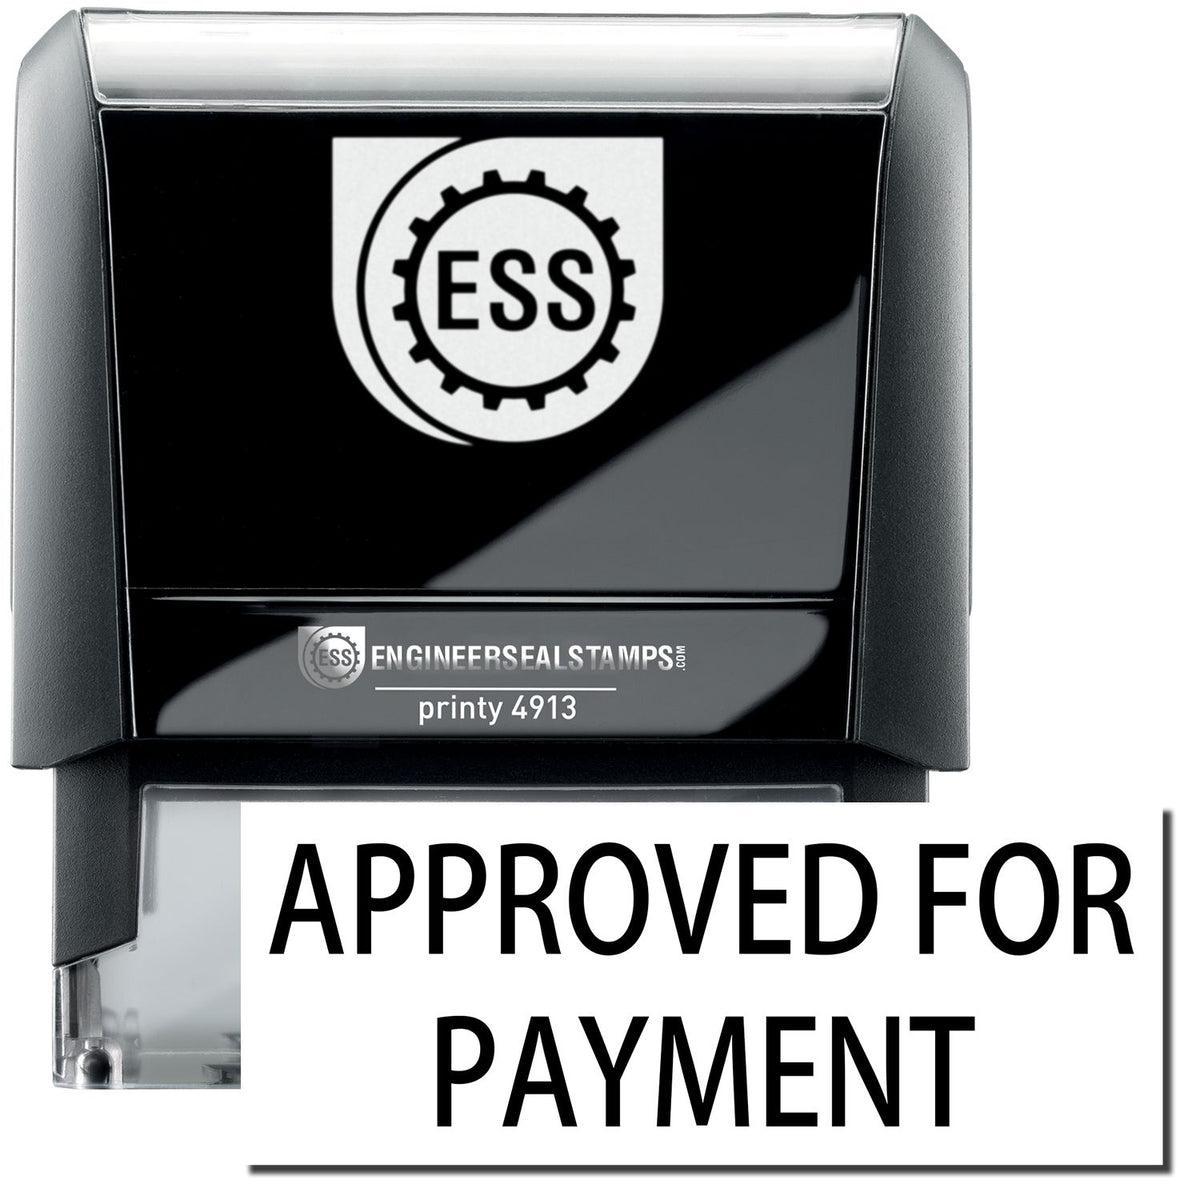 A large self-inking stamp with a stamped image showing the text &quot;APPROVED FOR PAYMENT&quot; in a large font displayed by it.